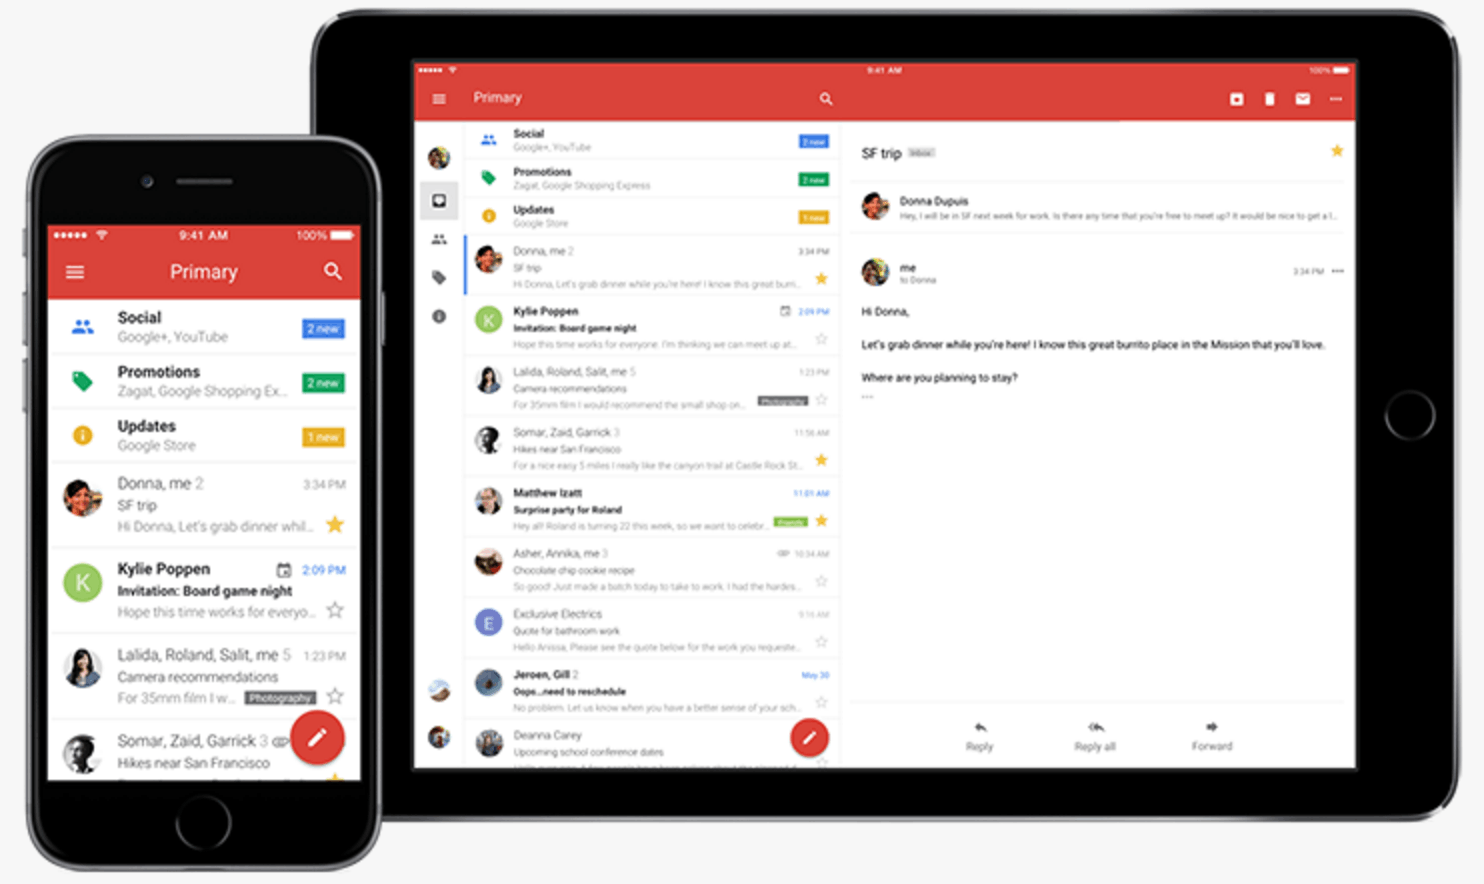 Tips and Tricks for Getting the Most Out of the Gmail Mobile App